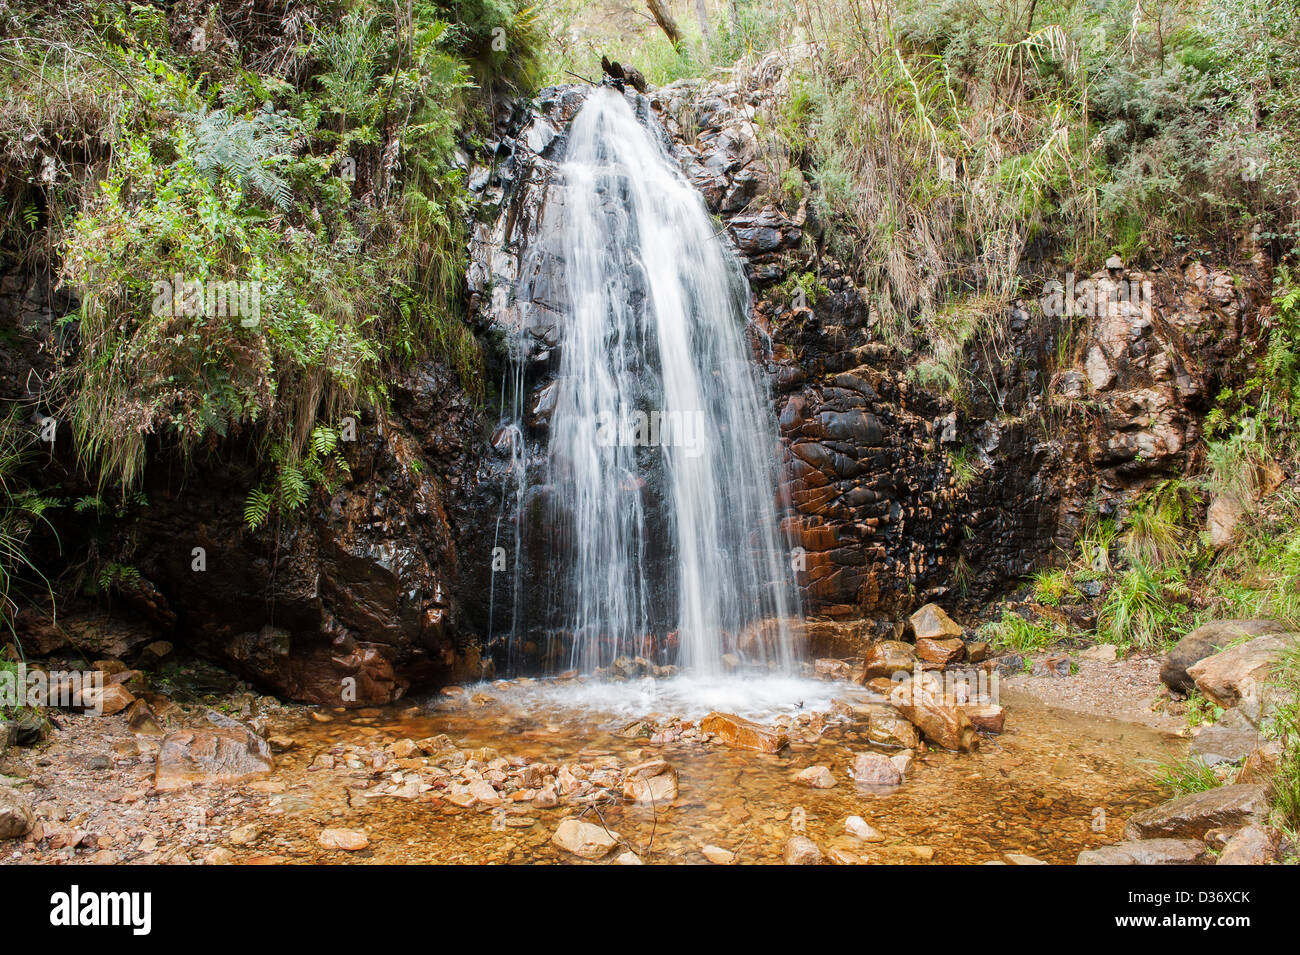 Second Falls in The Waterfall Gully National Park, found along the popular hiking trail to Mt. Lofty Stock Photo